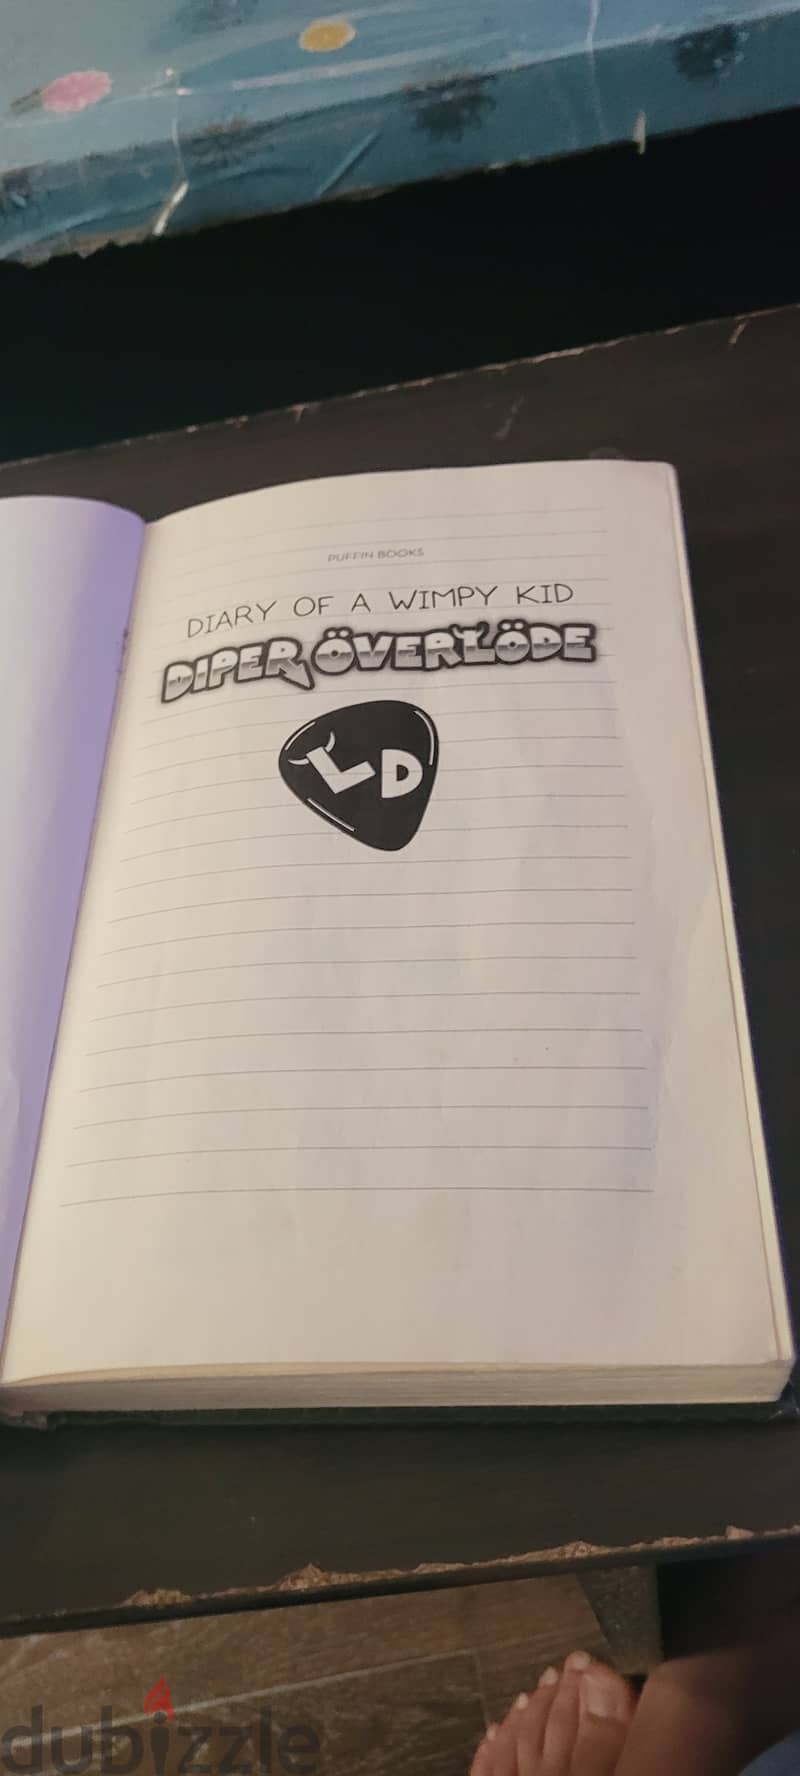 Diary of a wimpy kid Diper overlode 1